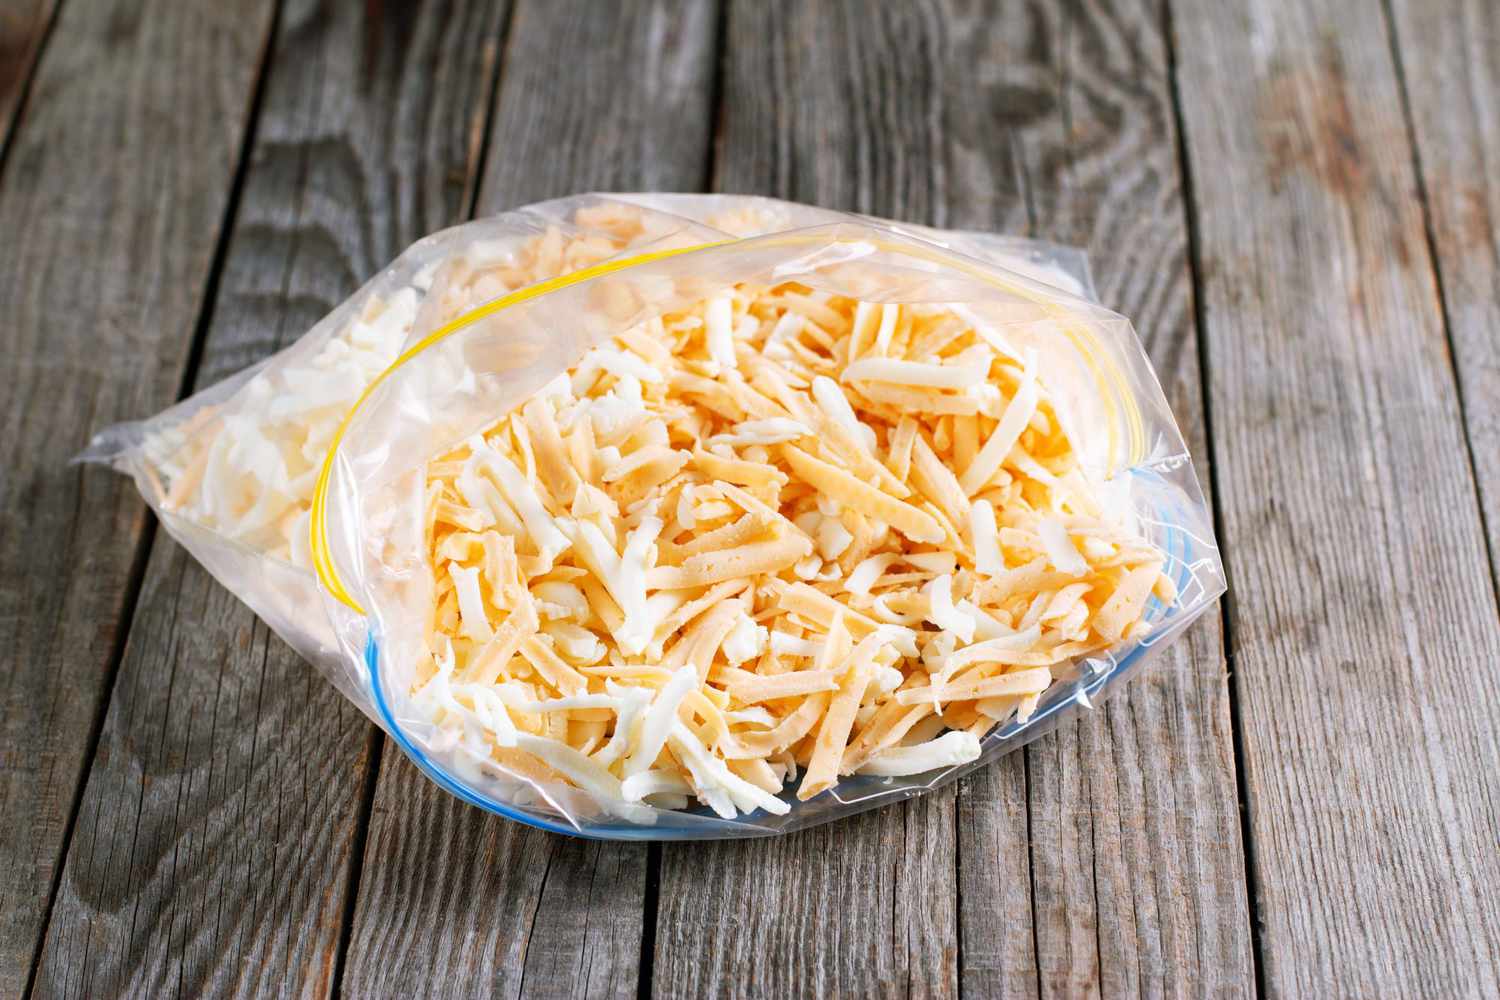 How to Store Shredded Cheese - Home-Ec 101